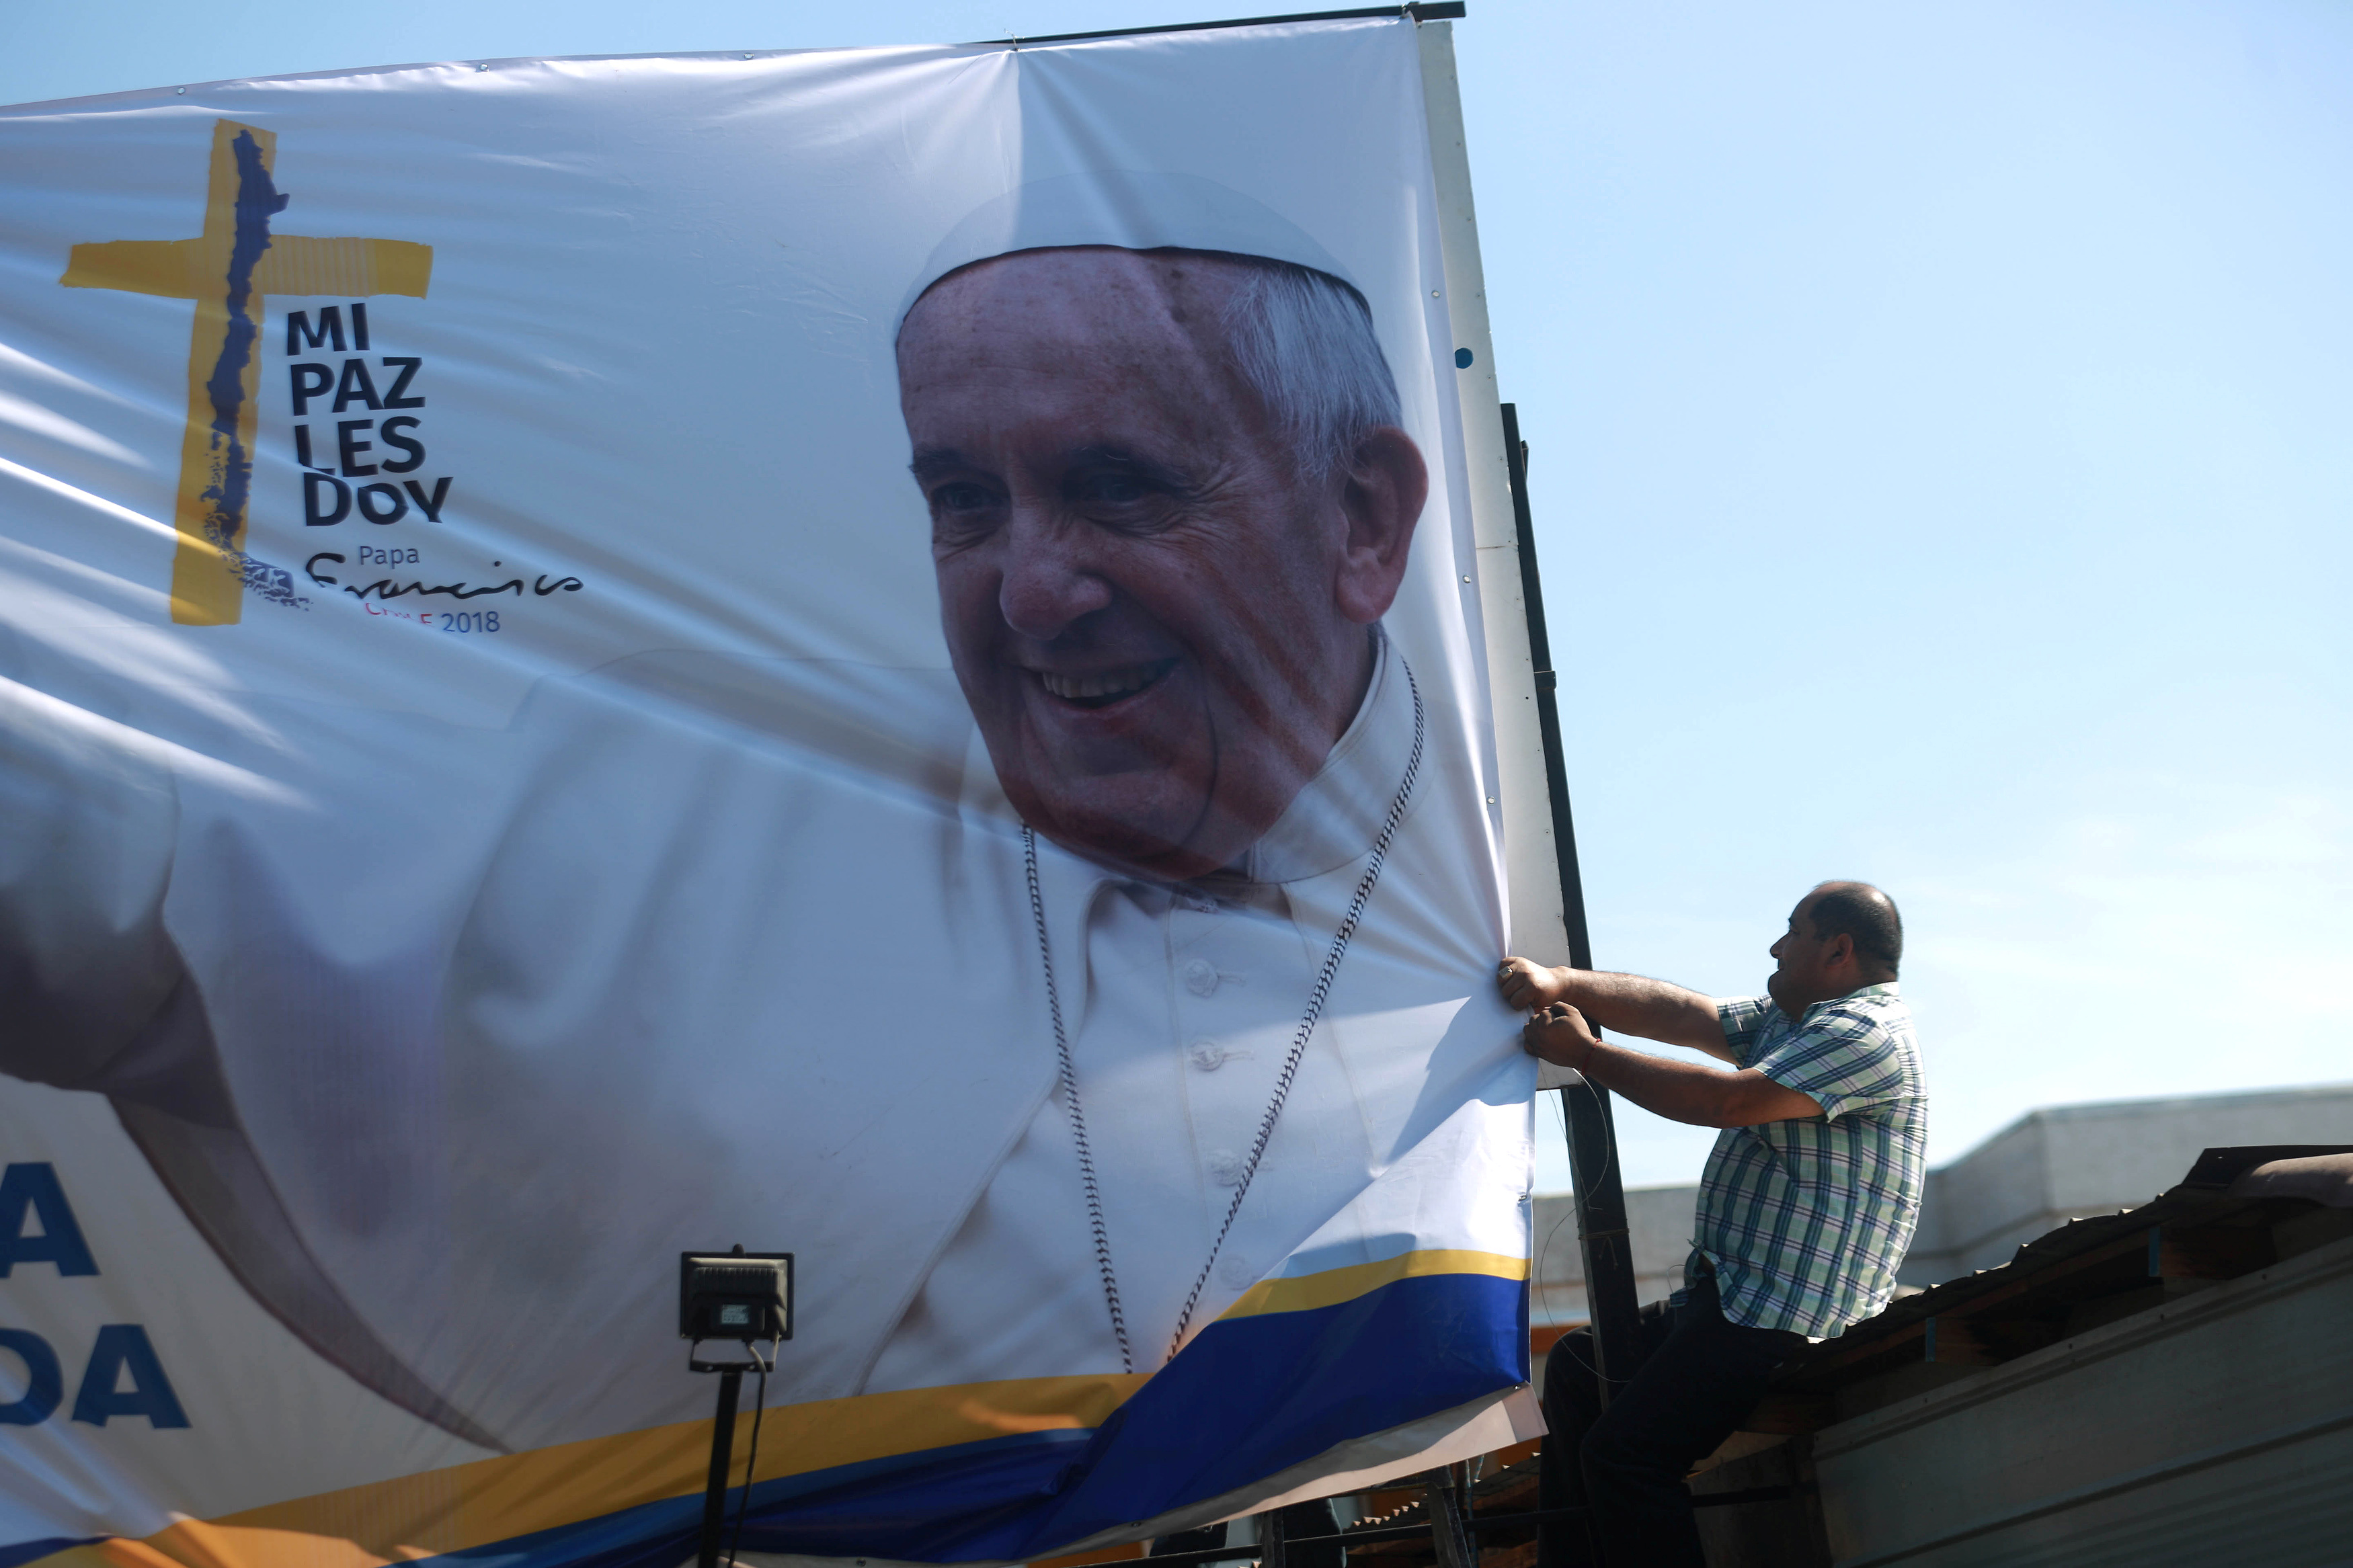 CAFOD calls for climate change and justice to be priorities for Pope in Peru